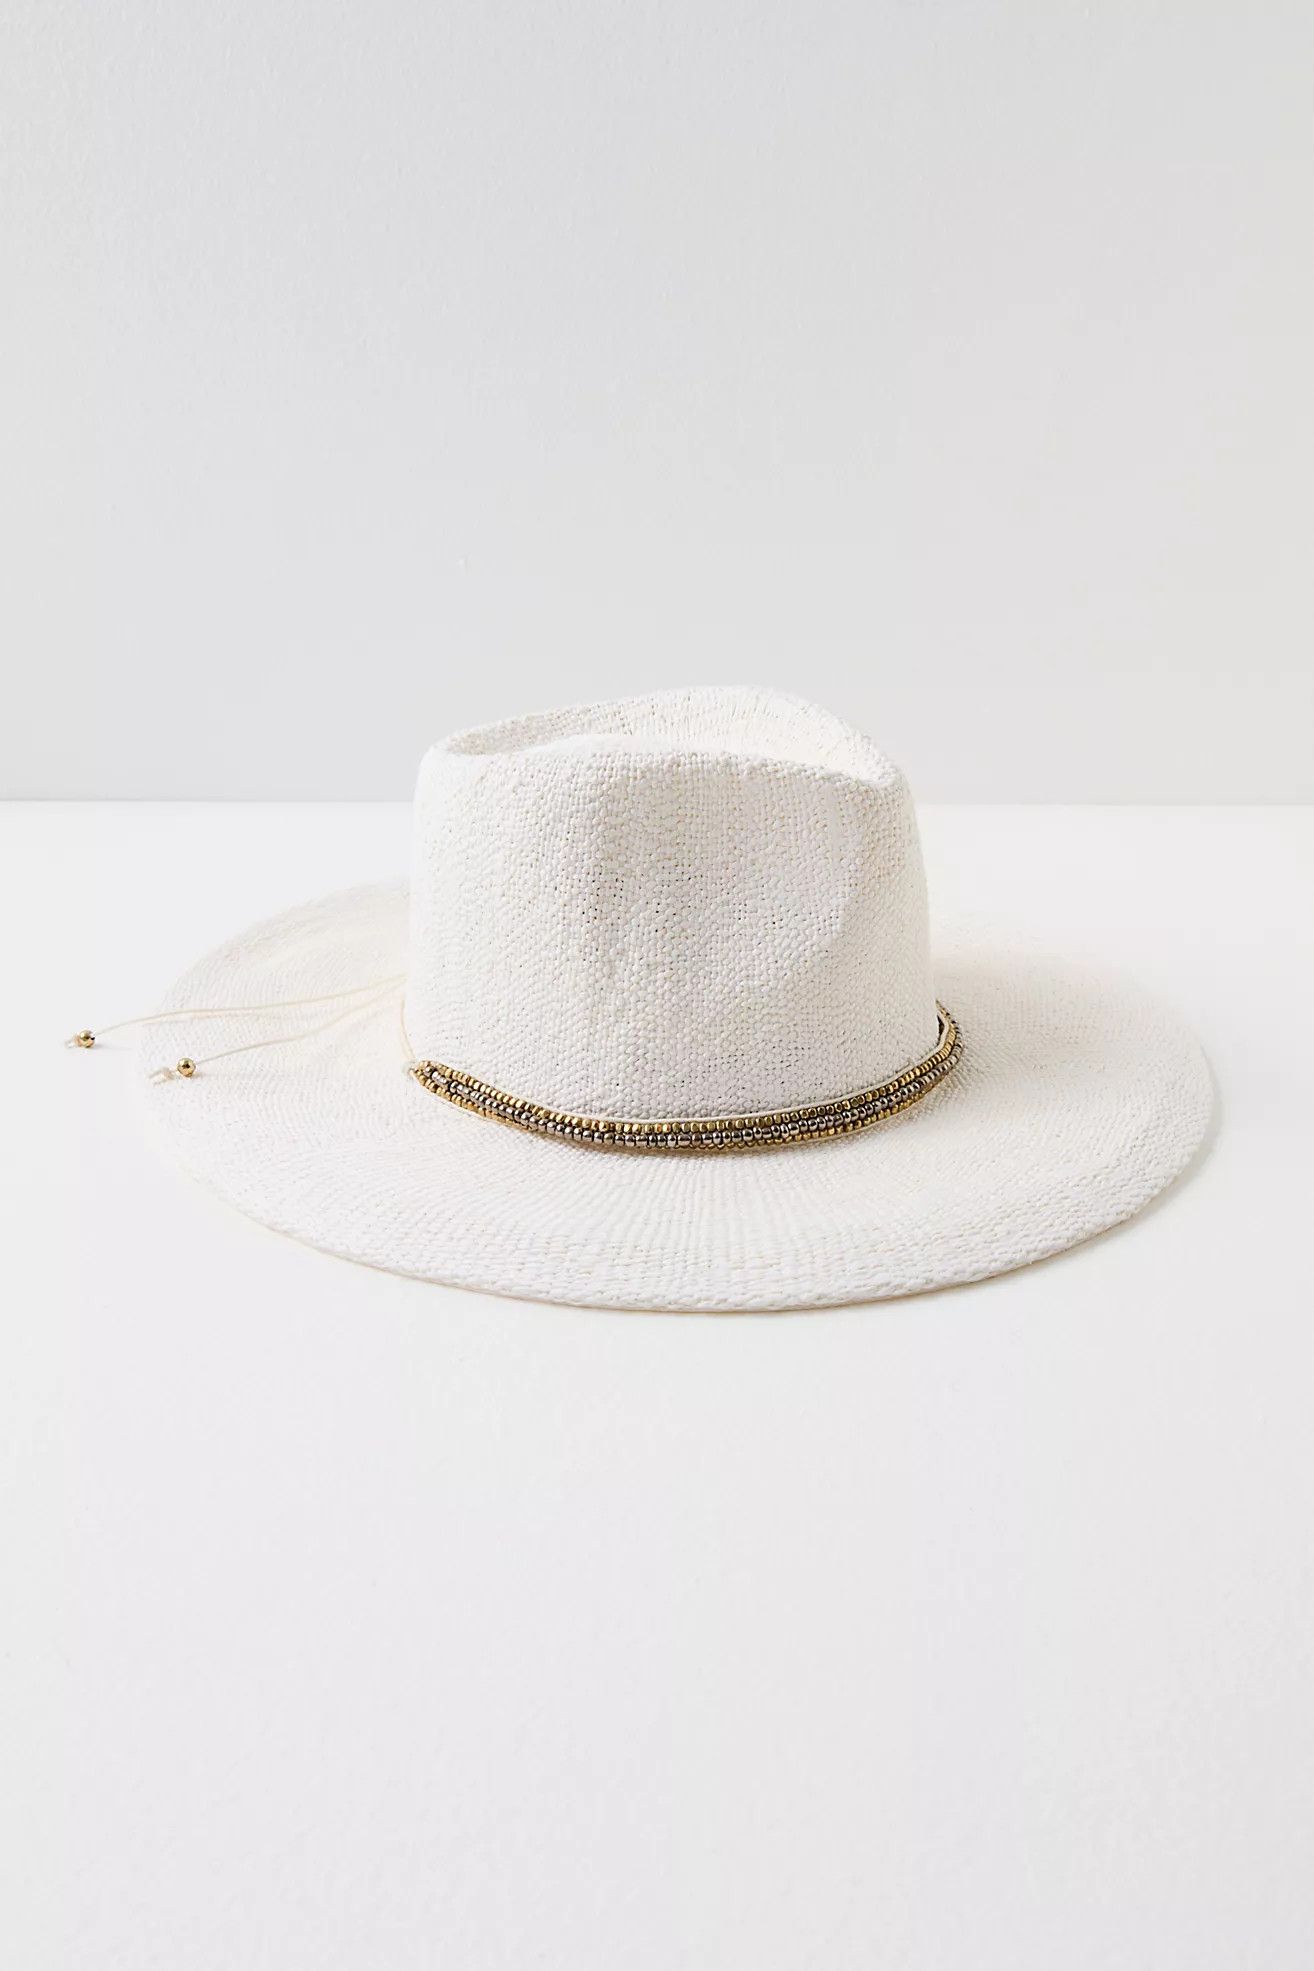 Monte Carlo Wide Brim Straw Hat | White Hat Outfit | Straw Cowboy Hat Spring Summer Hats For Women  | Free People (Global - UK&FR Excluded)